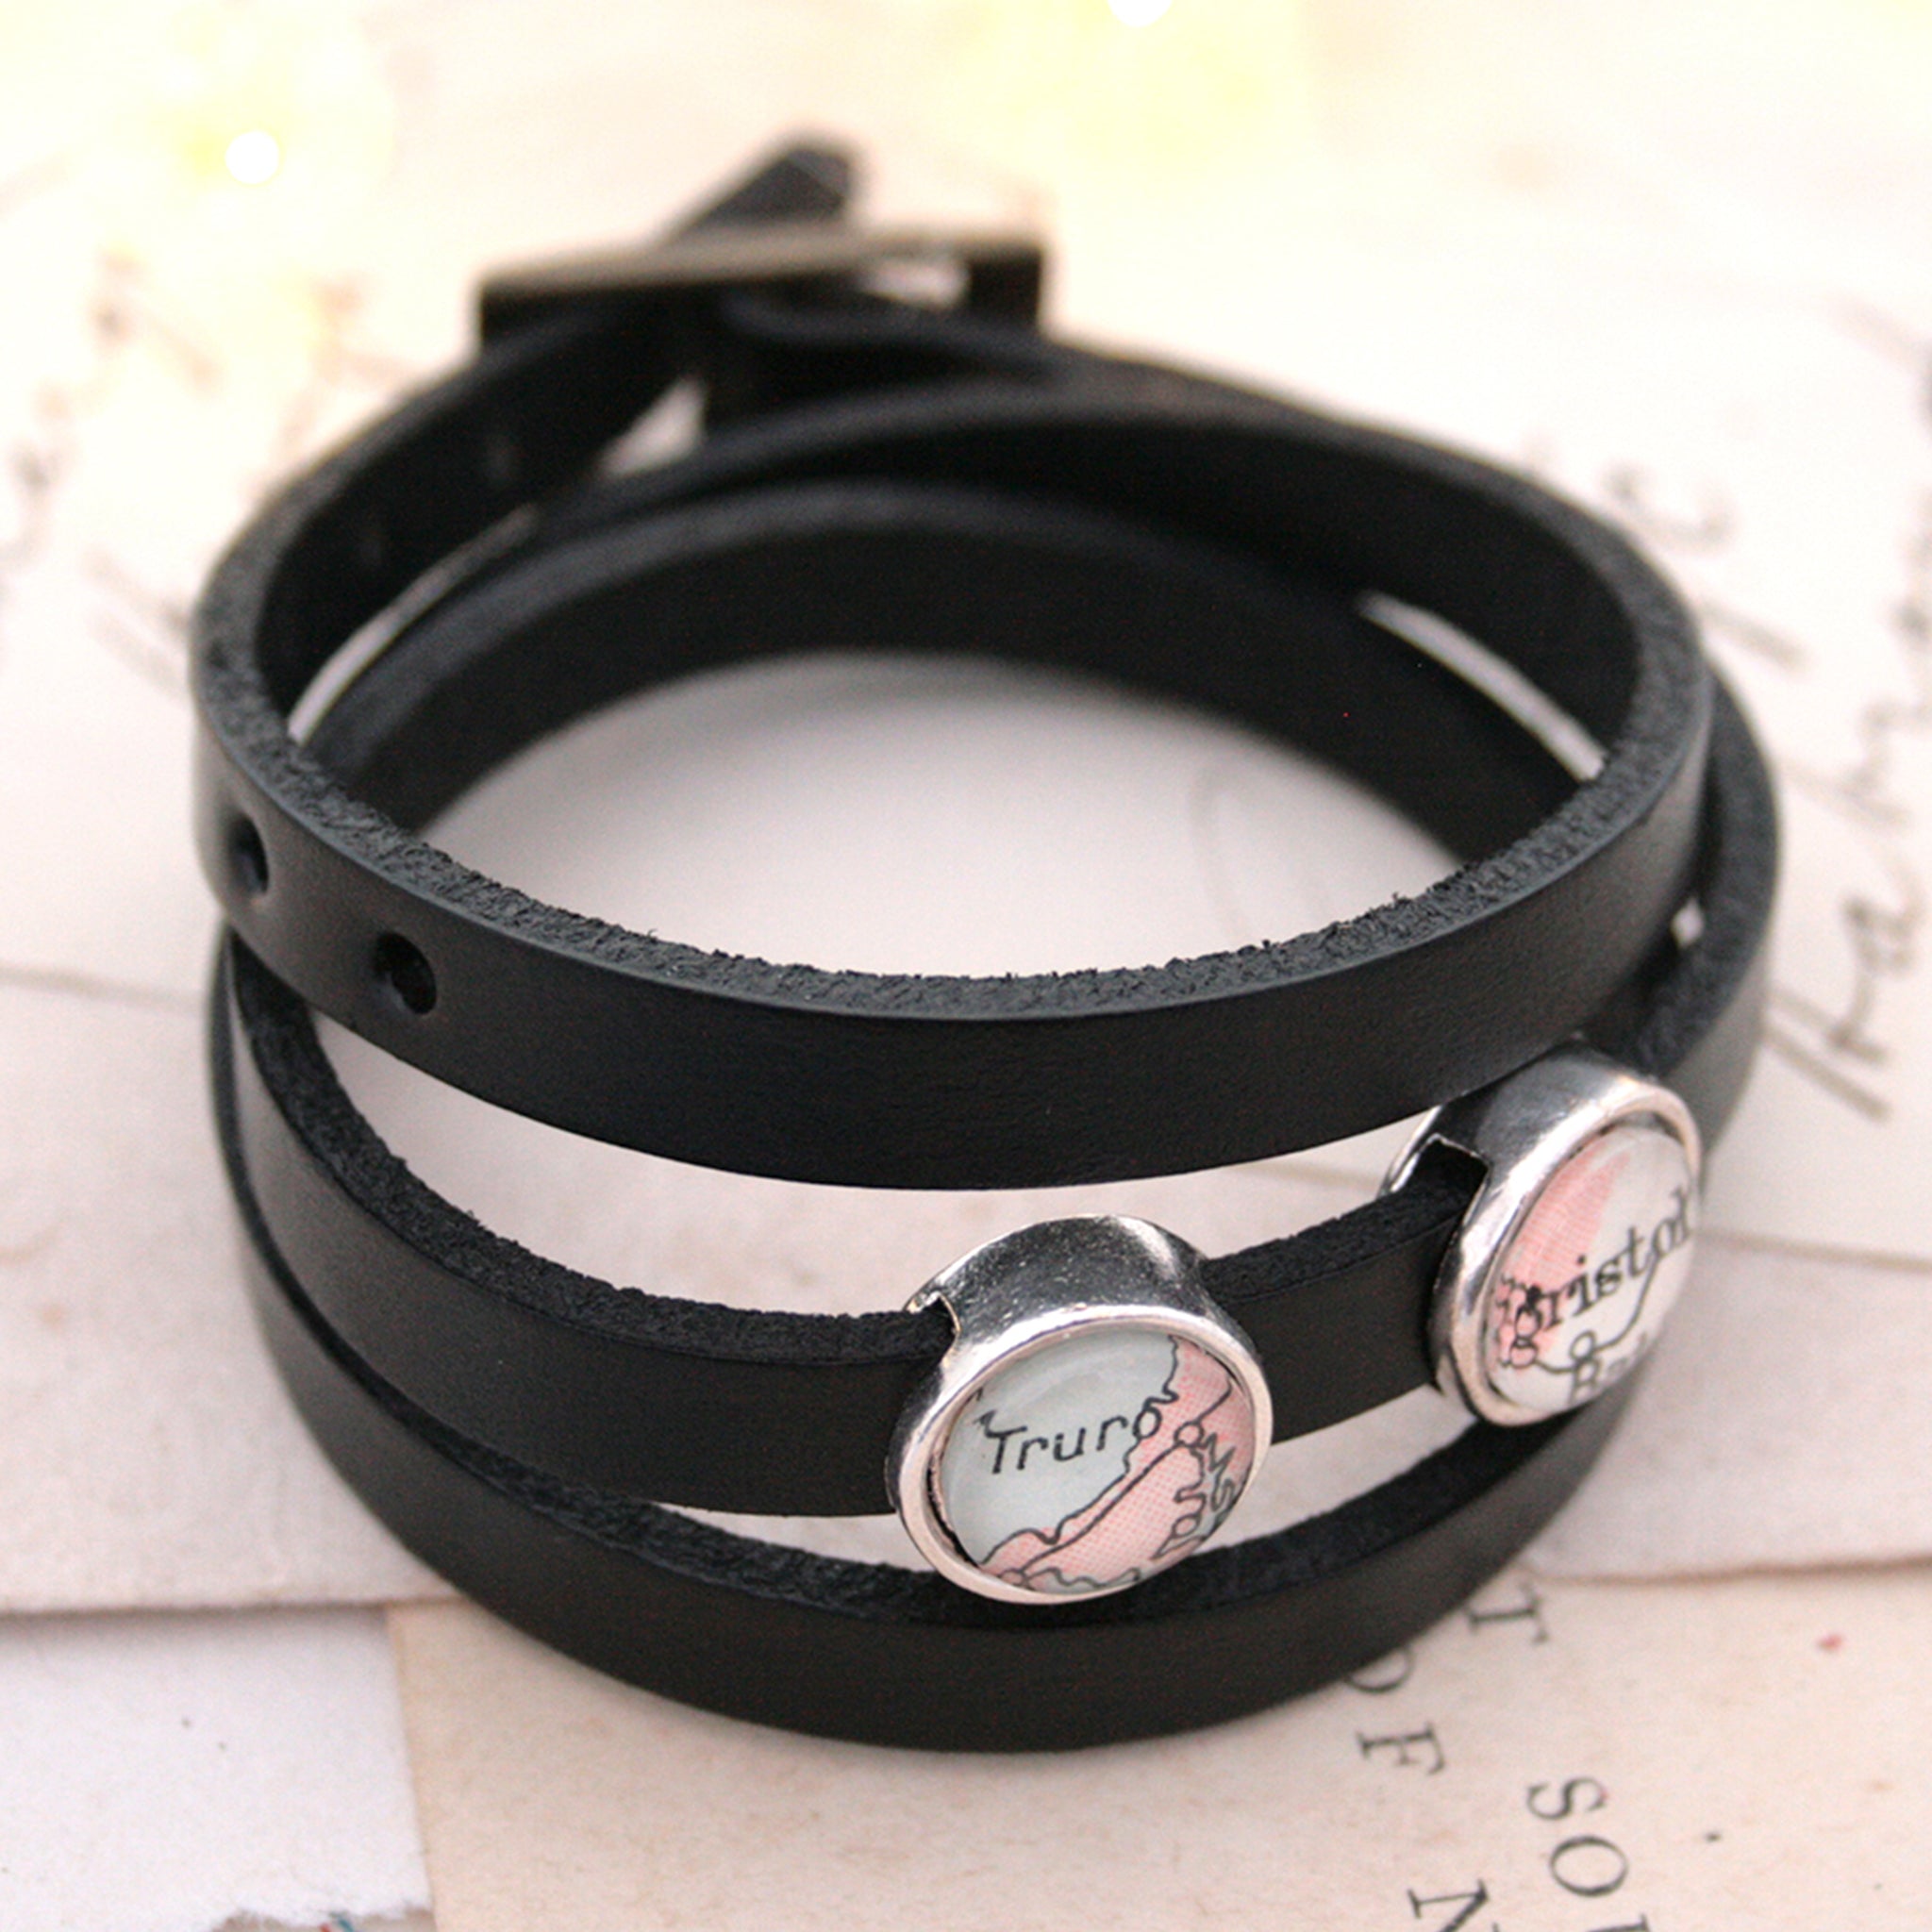 Black mens leather bracelet personalised with maps